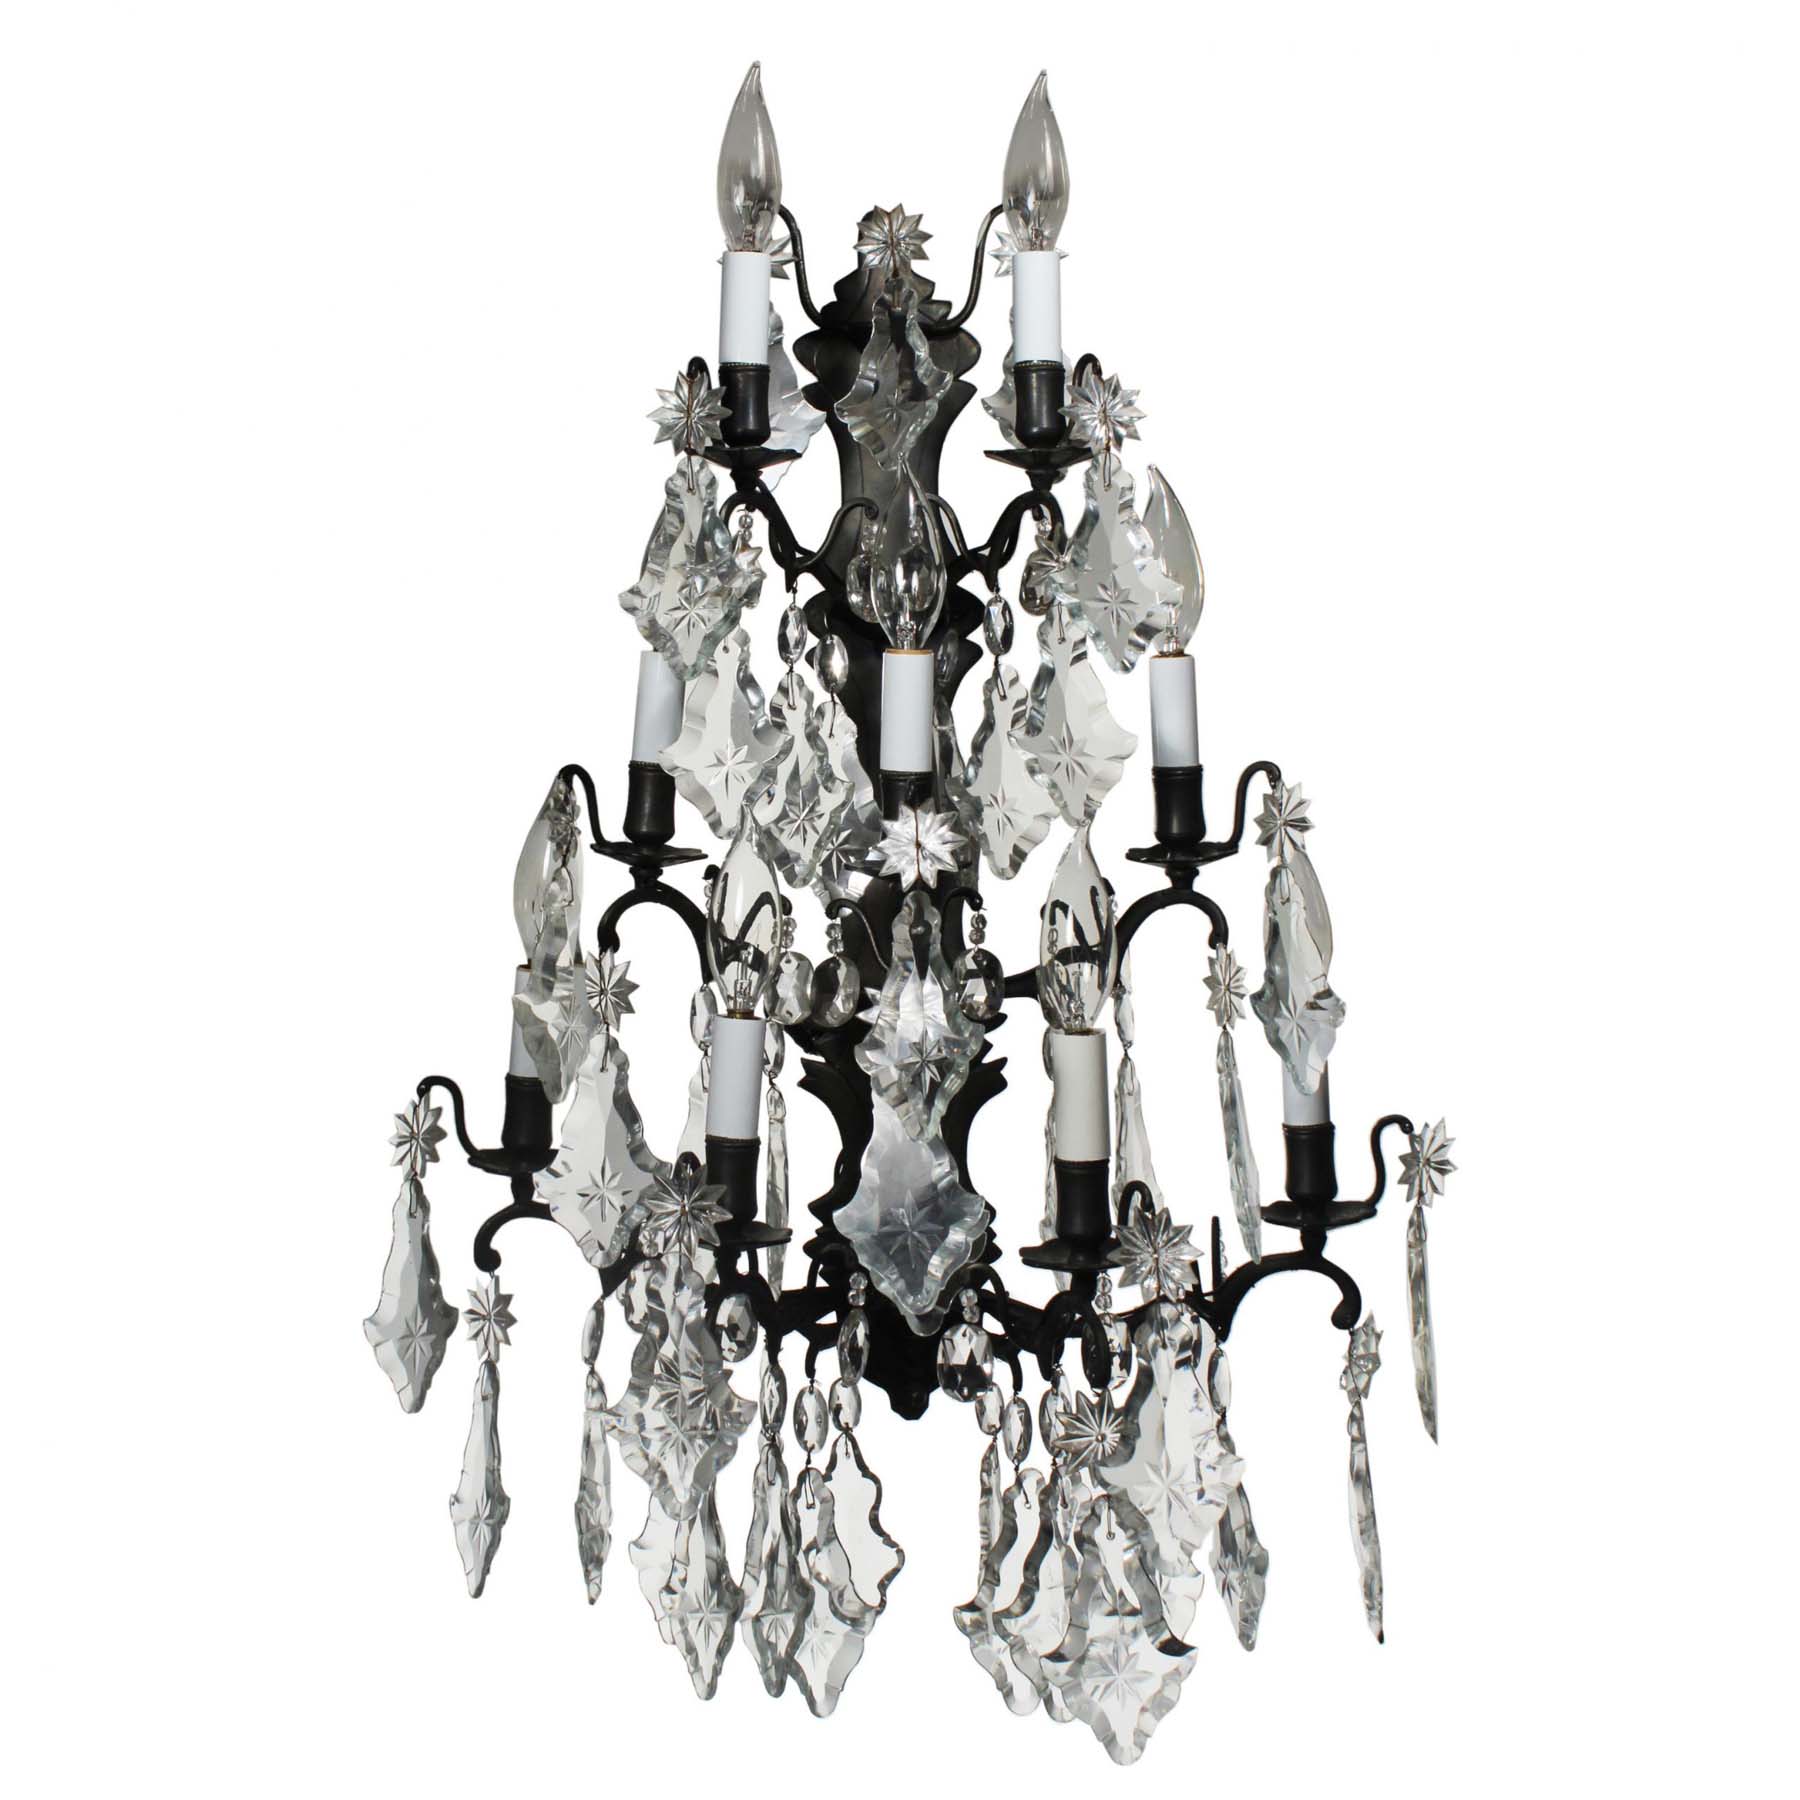 Substantial Pair of Bronze Vintage Sconces with Crystal Prisms-69357